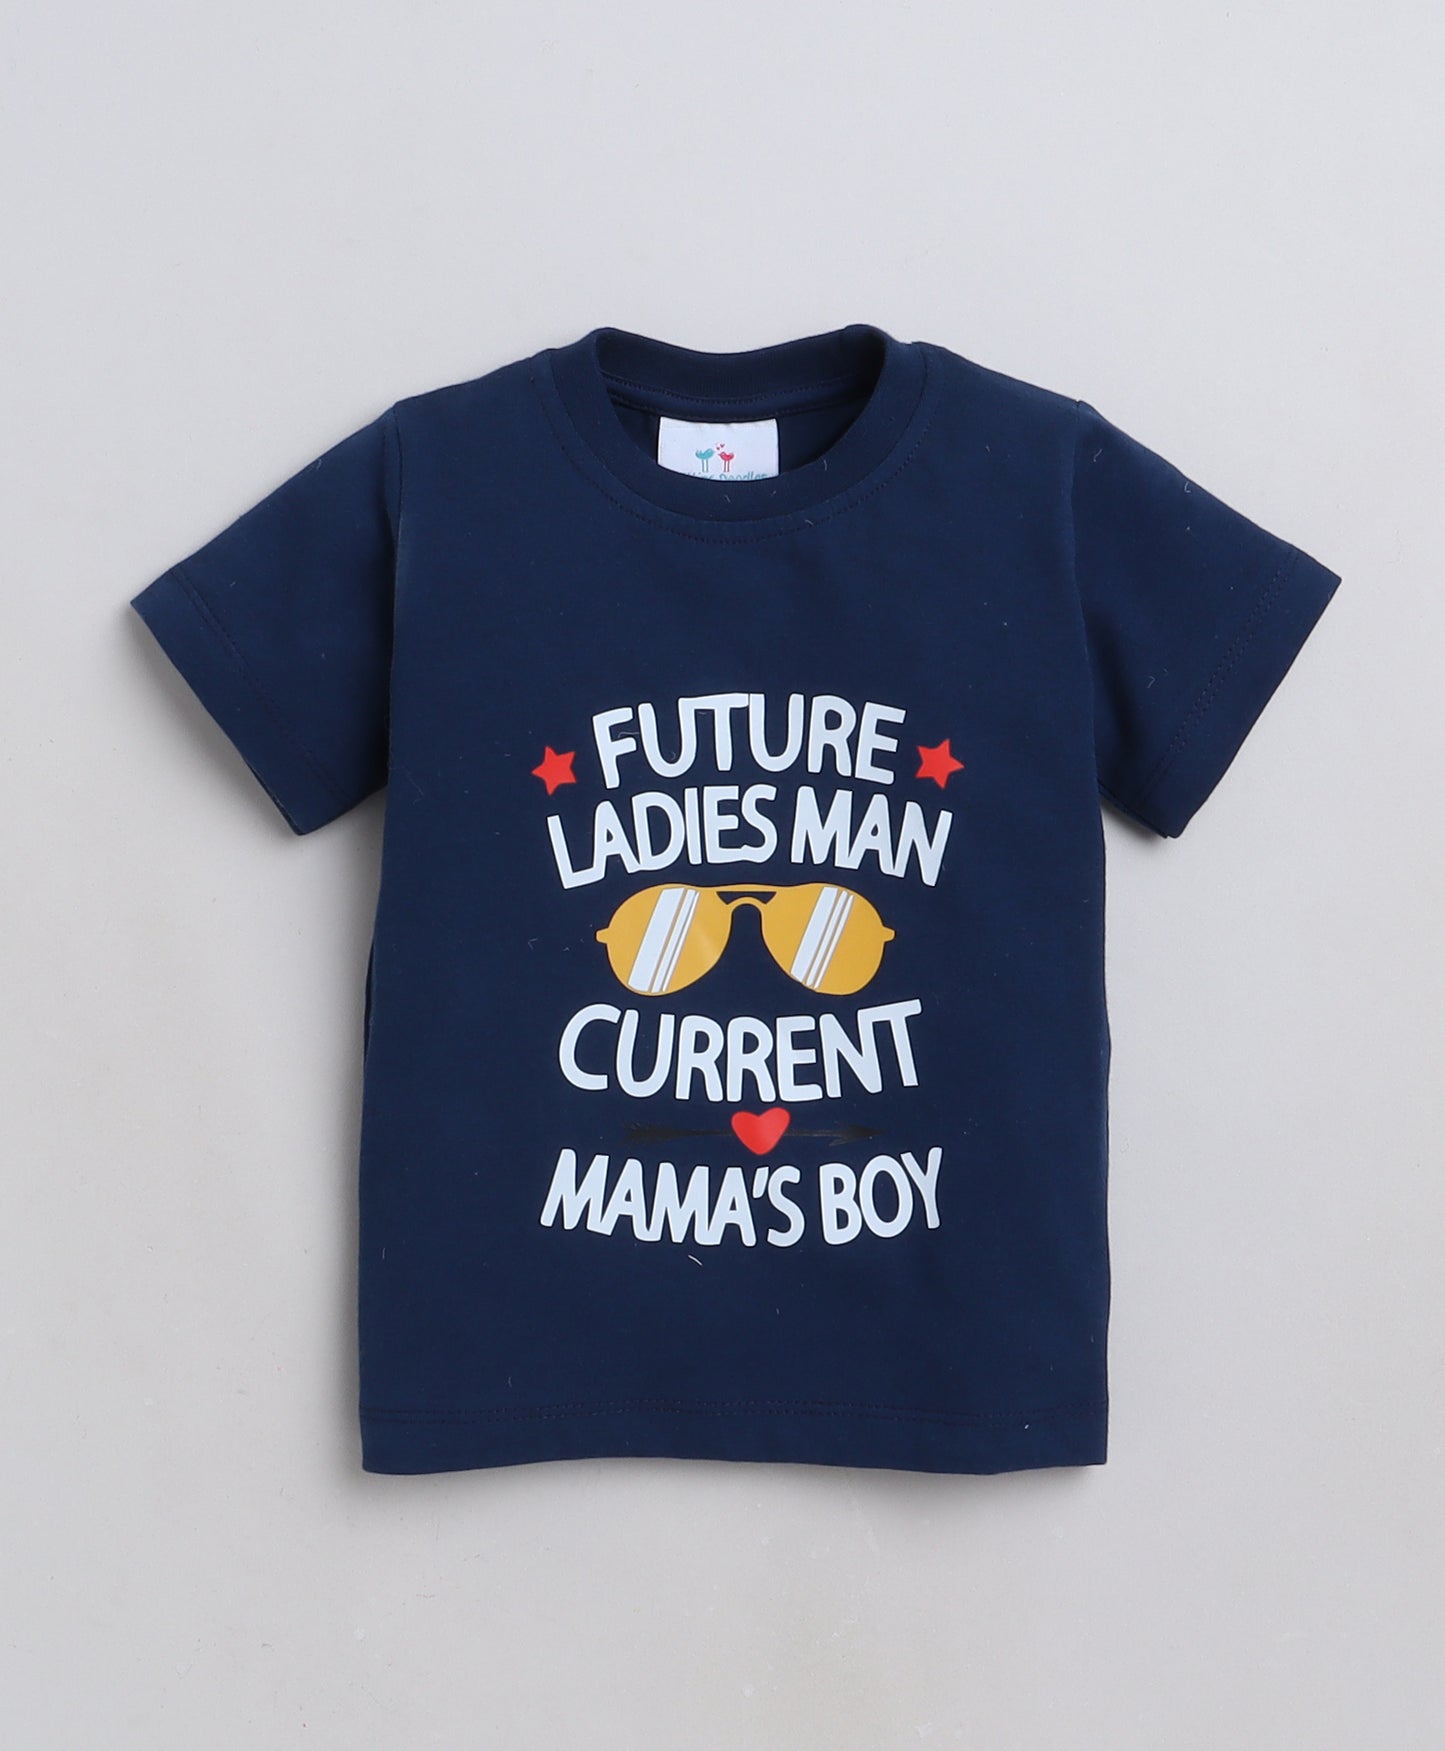 Knitting Doodles Premium Cotton Kids' Night suit with Mama's Boy print t-shirt and Pyjama- Blue and White